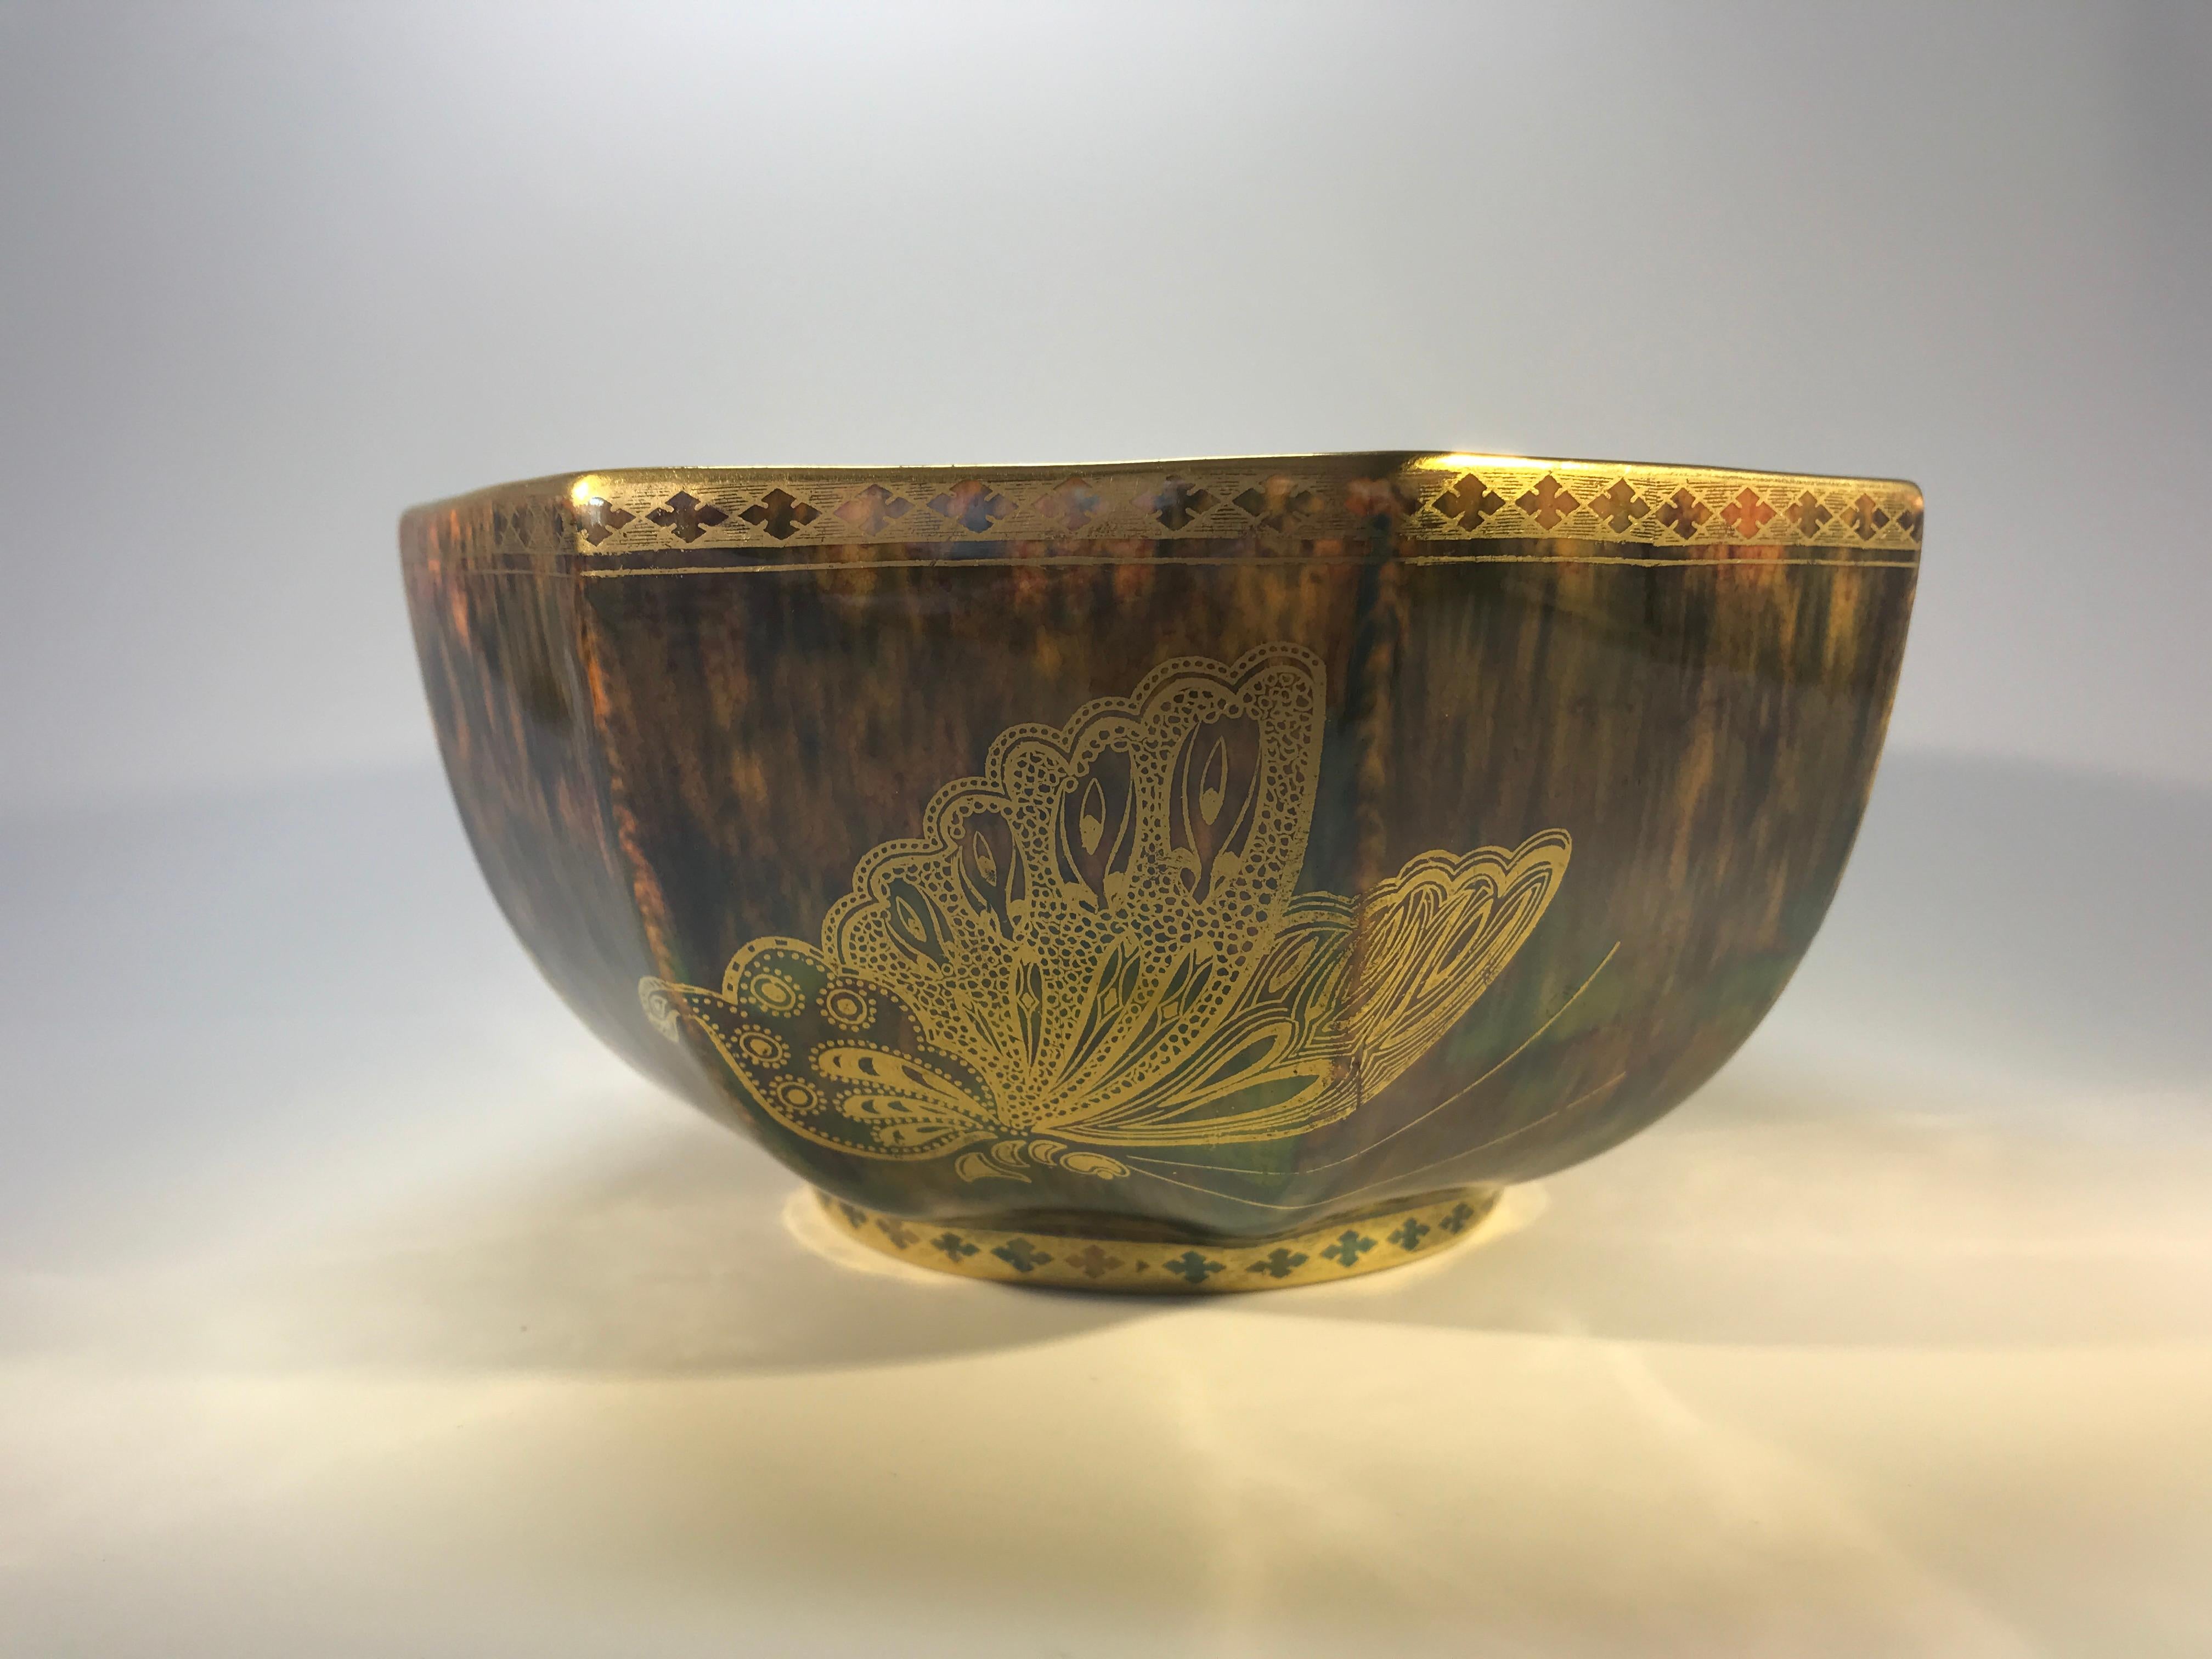 Daisy Makeig-Jones for Wedgwood, England octagonal bone china bowl with the interior decorated with mother of pearl colored mottlings and three richly decorated butterflies. Exterior is embellished with large gilt butterflies on a rich bronze